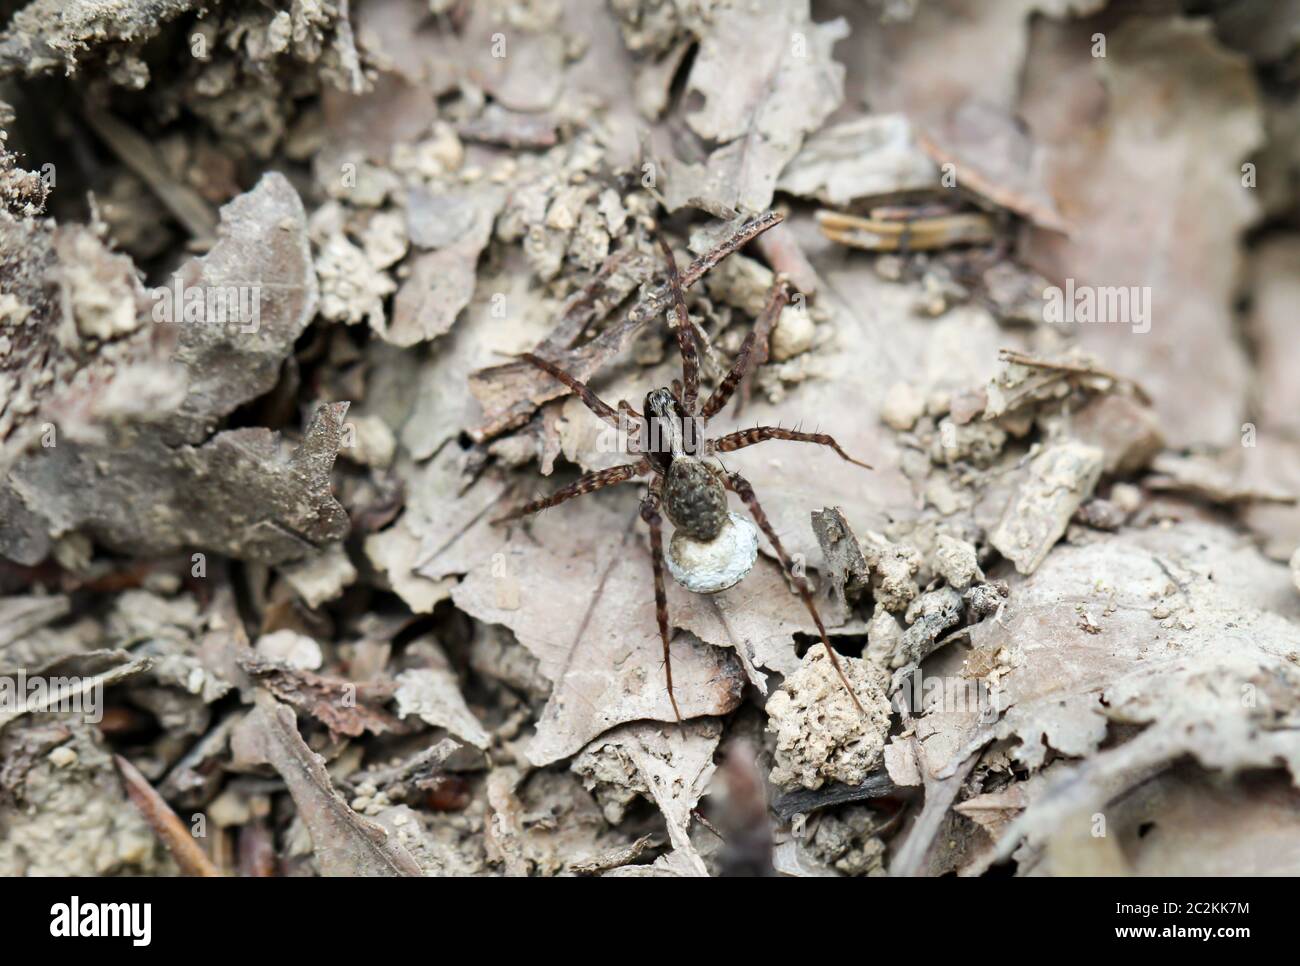 a spider with baby spiders Stock Photo